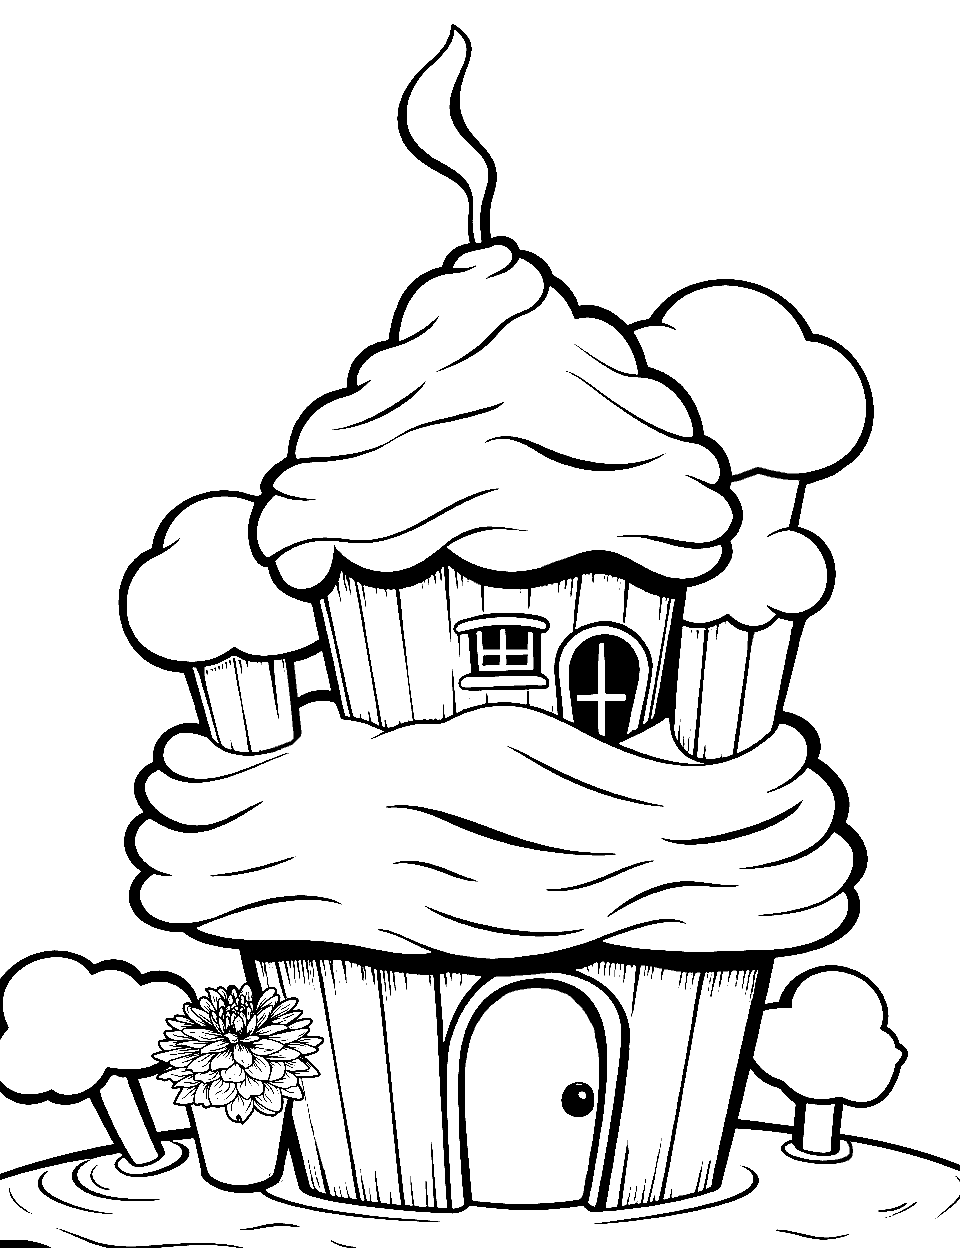 Ice Cream House Coloring Page - A house made out of ice cream.